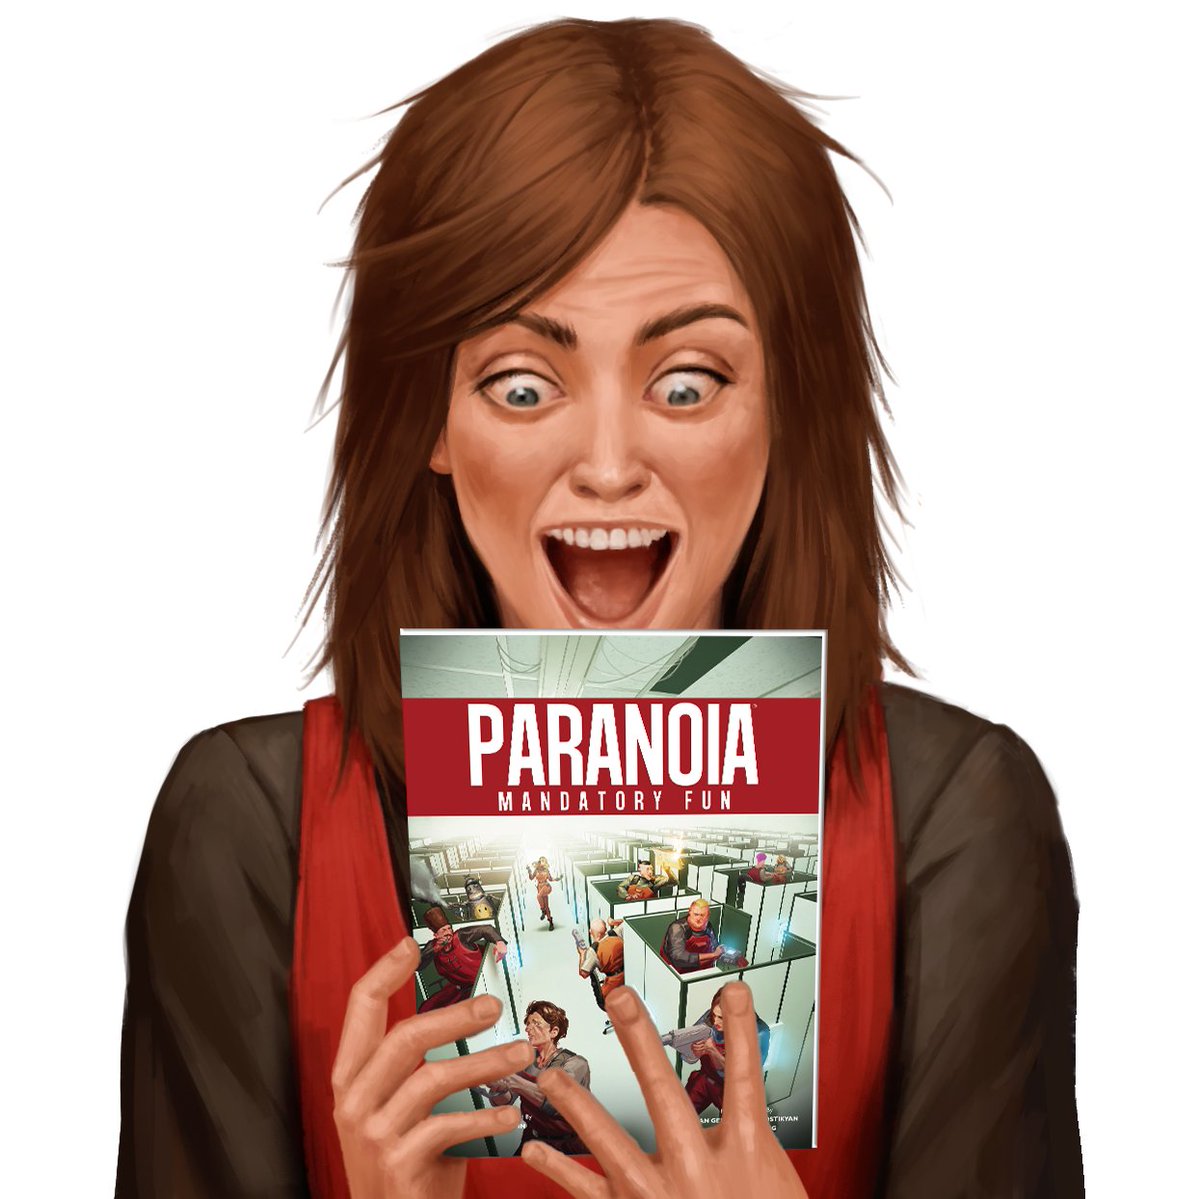 Experience the Agile and High Stakes world of Pre-Whoops economic Financial investments. [What could possibly go wrong...] Brand new mission for Paranoia, Mandatory Fun is available right now! mongoosepublishing.com/products/manda… #paranoiarpg #friendcomputer #ttrpg #mongoosepublishing